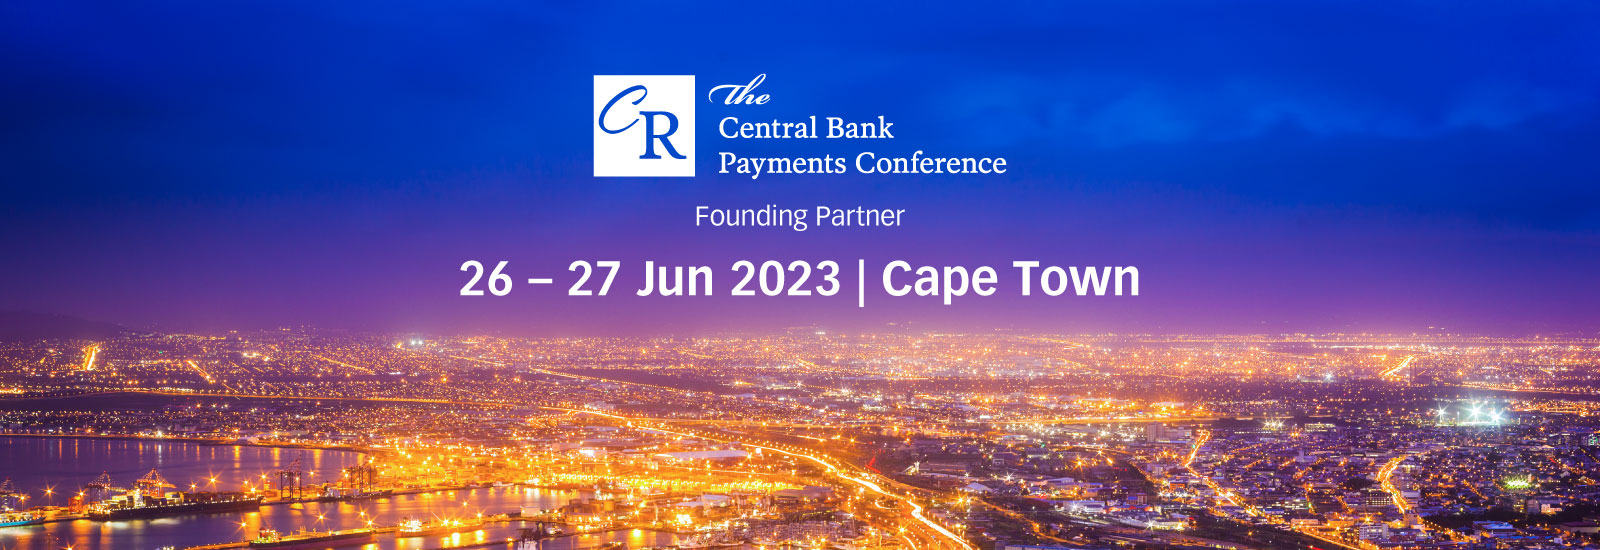 ProgressSoft at the Central Bank Payments Conference 2023